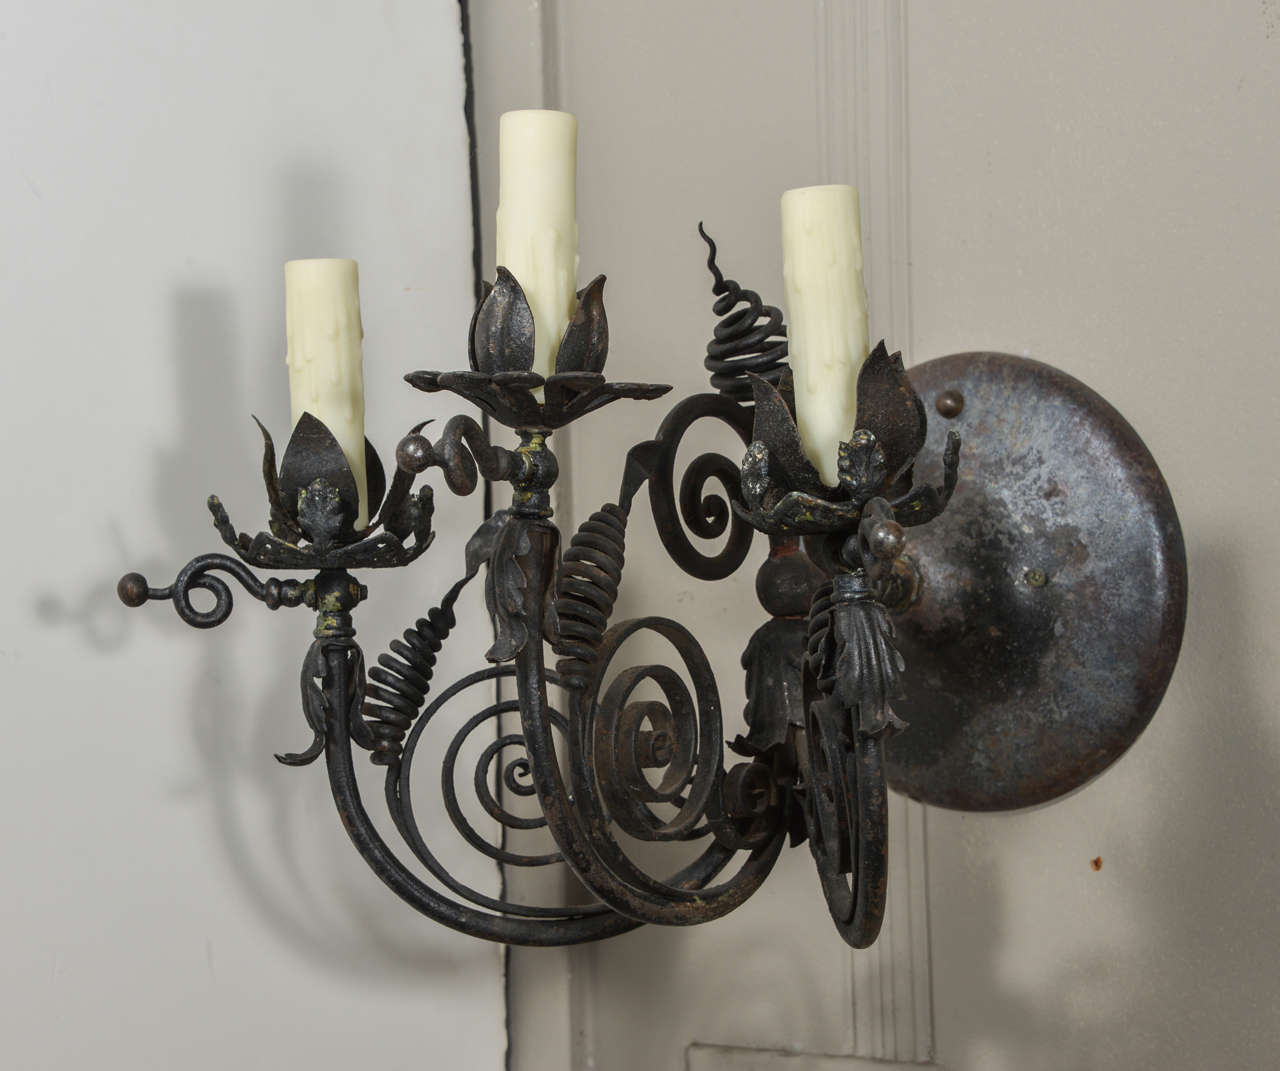 Large French Fanciful Sconce
Created by Hand
Very Dramatic